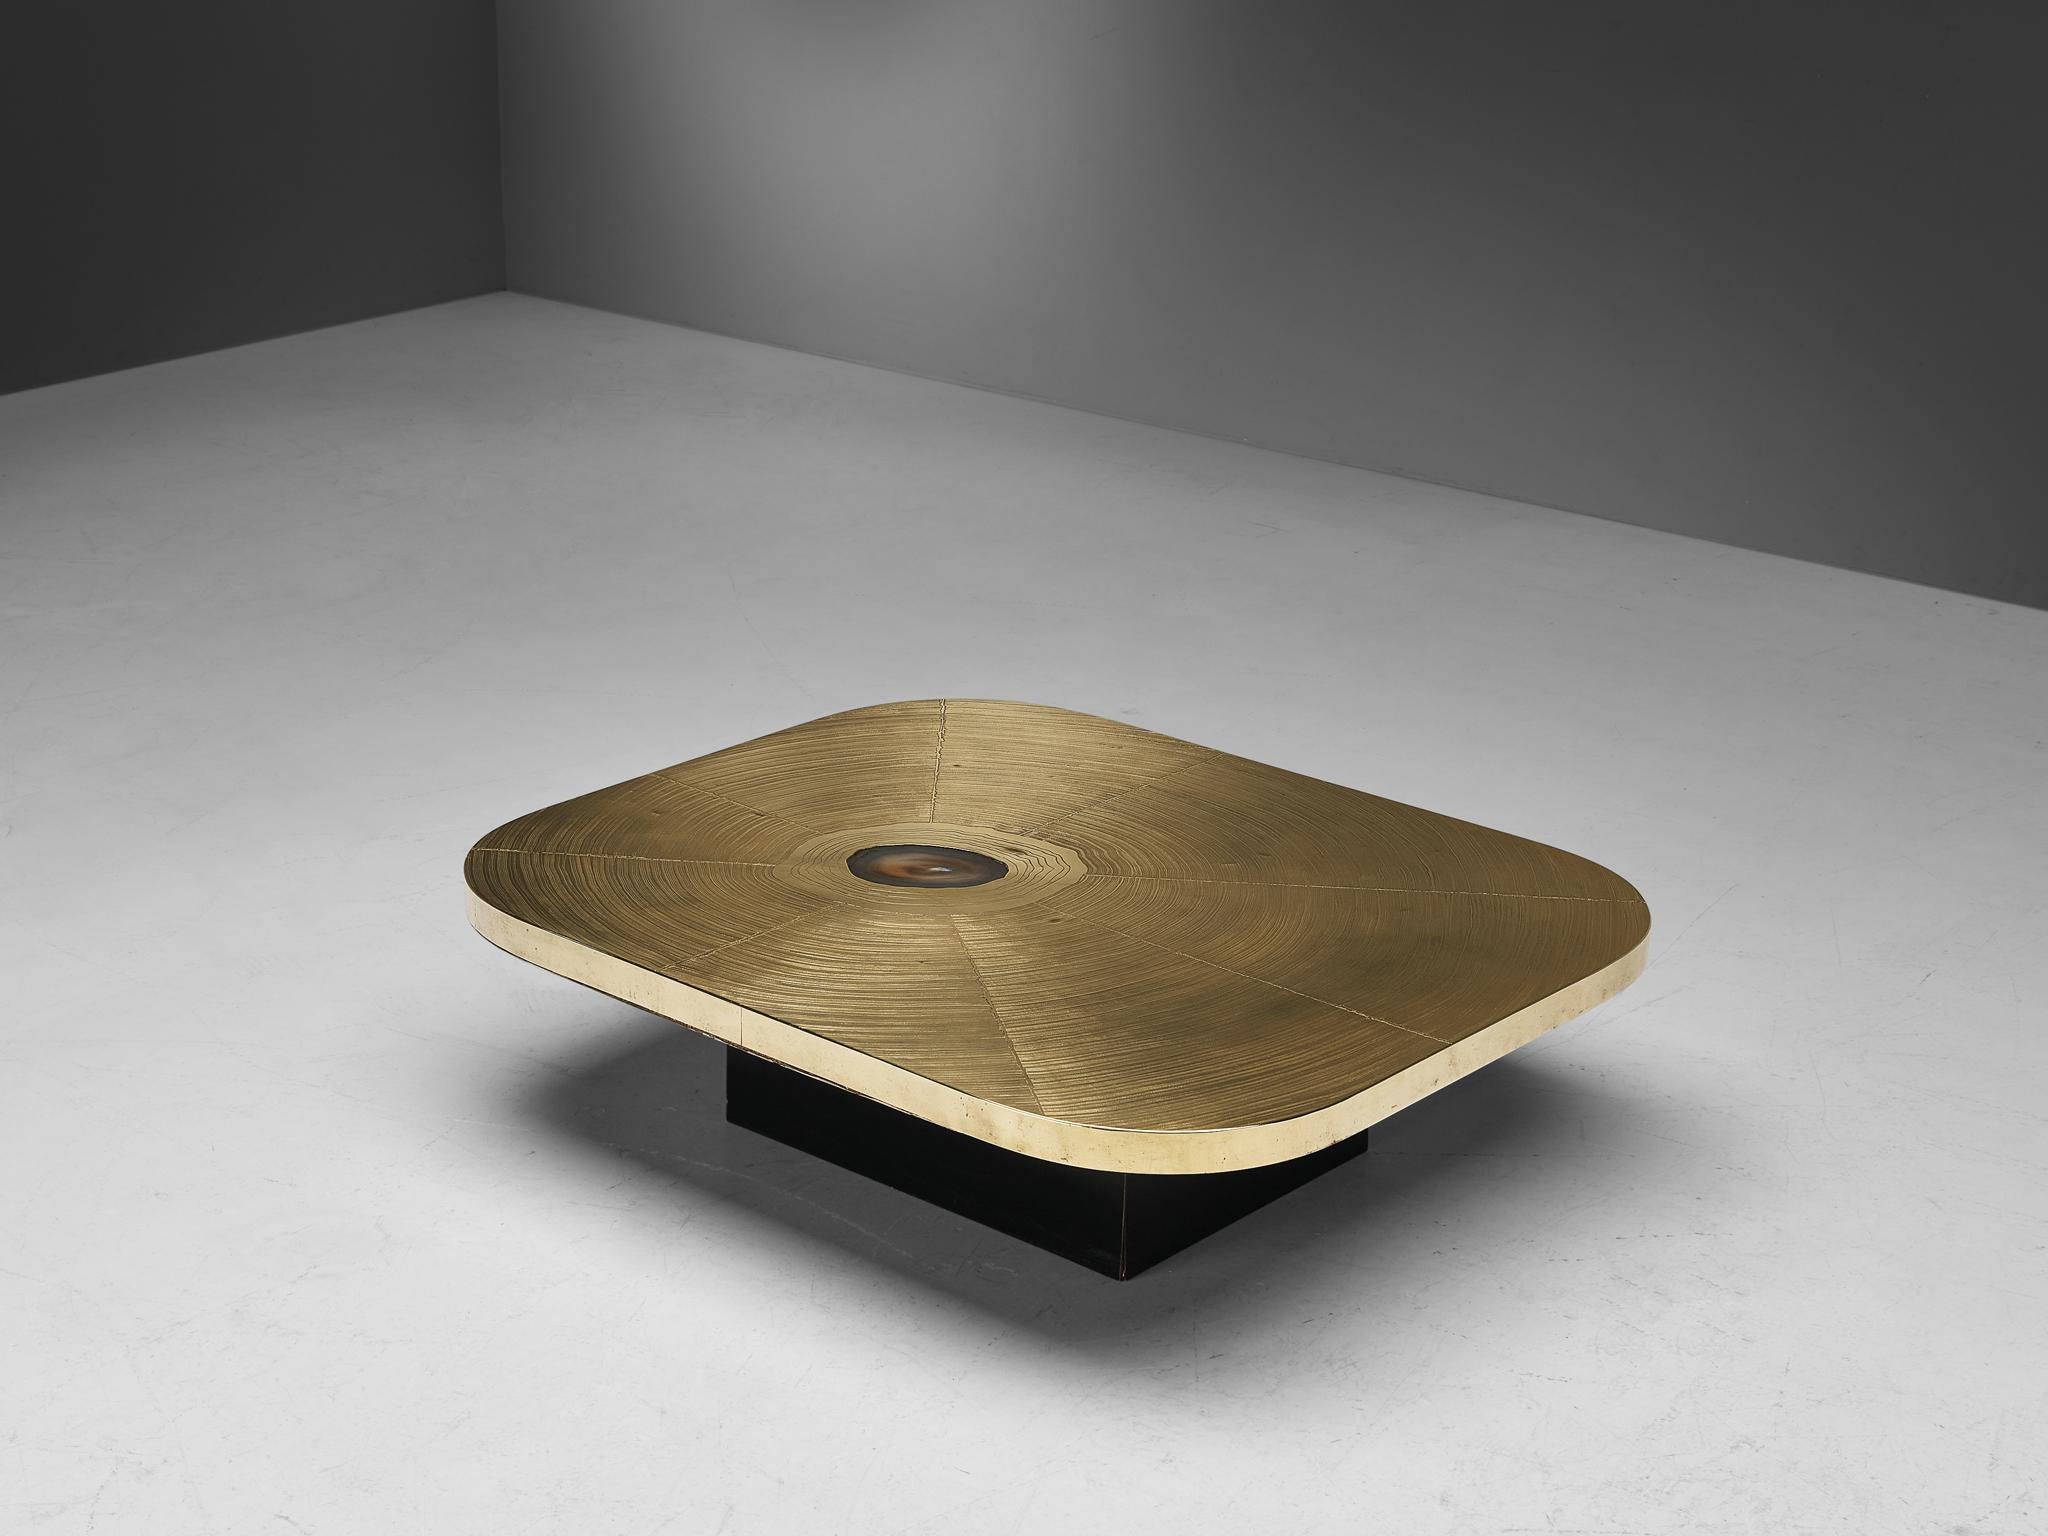 Lova Creation, coffee table, brass, wood, agate, Belgium, 1980s

This luxurious side table by Lova Creation is a dazzling eyecatcher. The golden square tabletop is signed and shows a pattern of large abstract brush strokes. The top is inlayed with